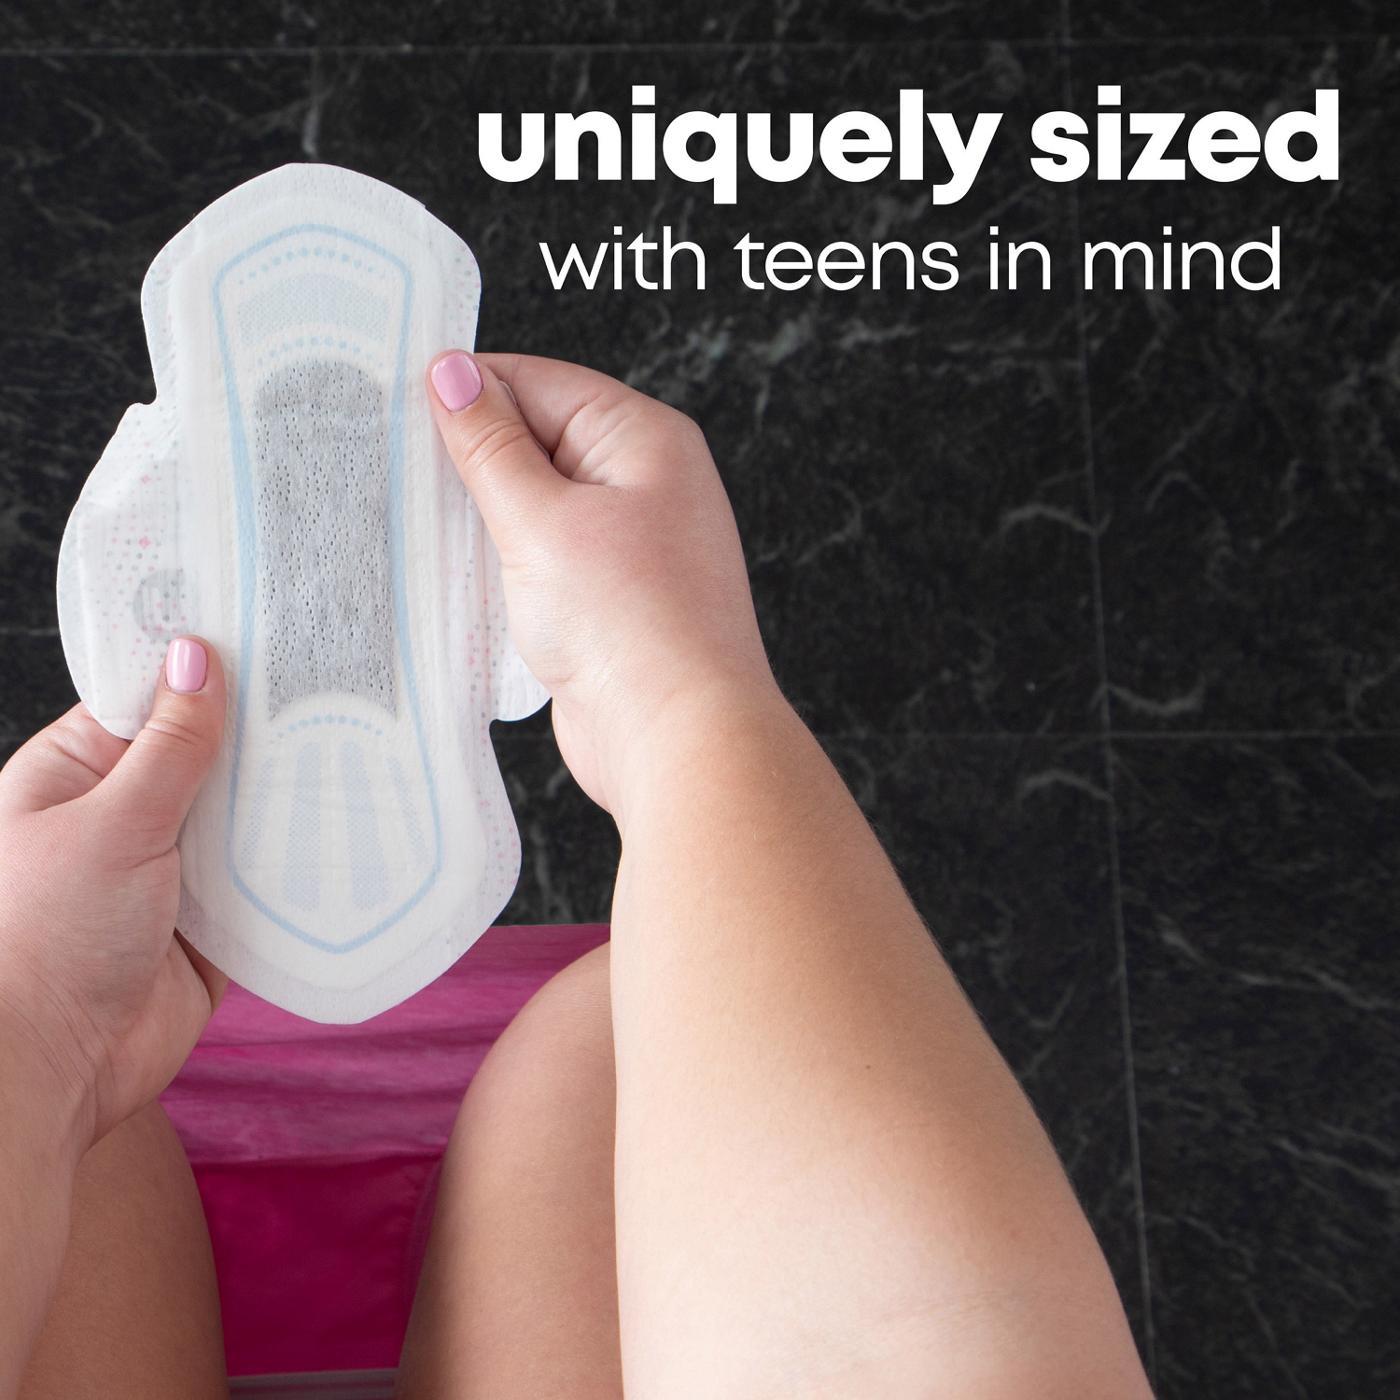 U by Kotex Balance - Sized for Teens Ultra Thin Pads with Wings - Heavy Absorbency; image 6 of 8